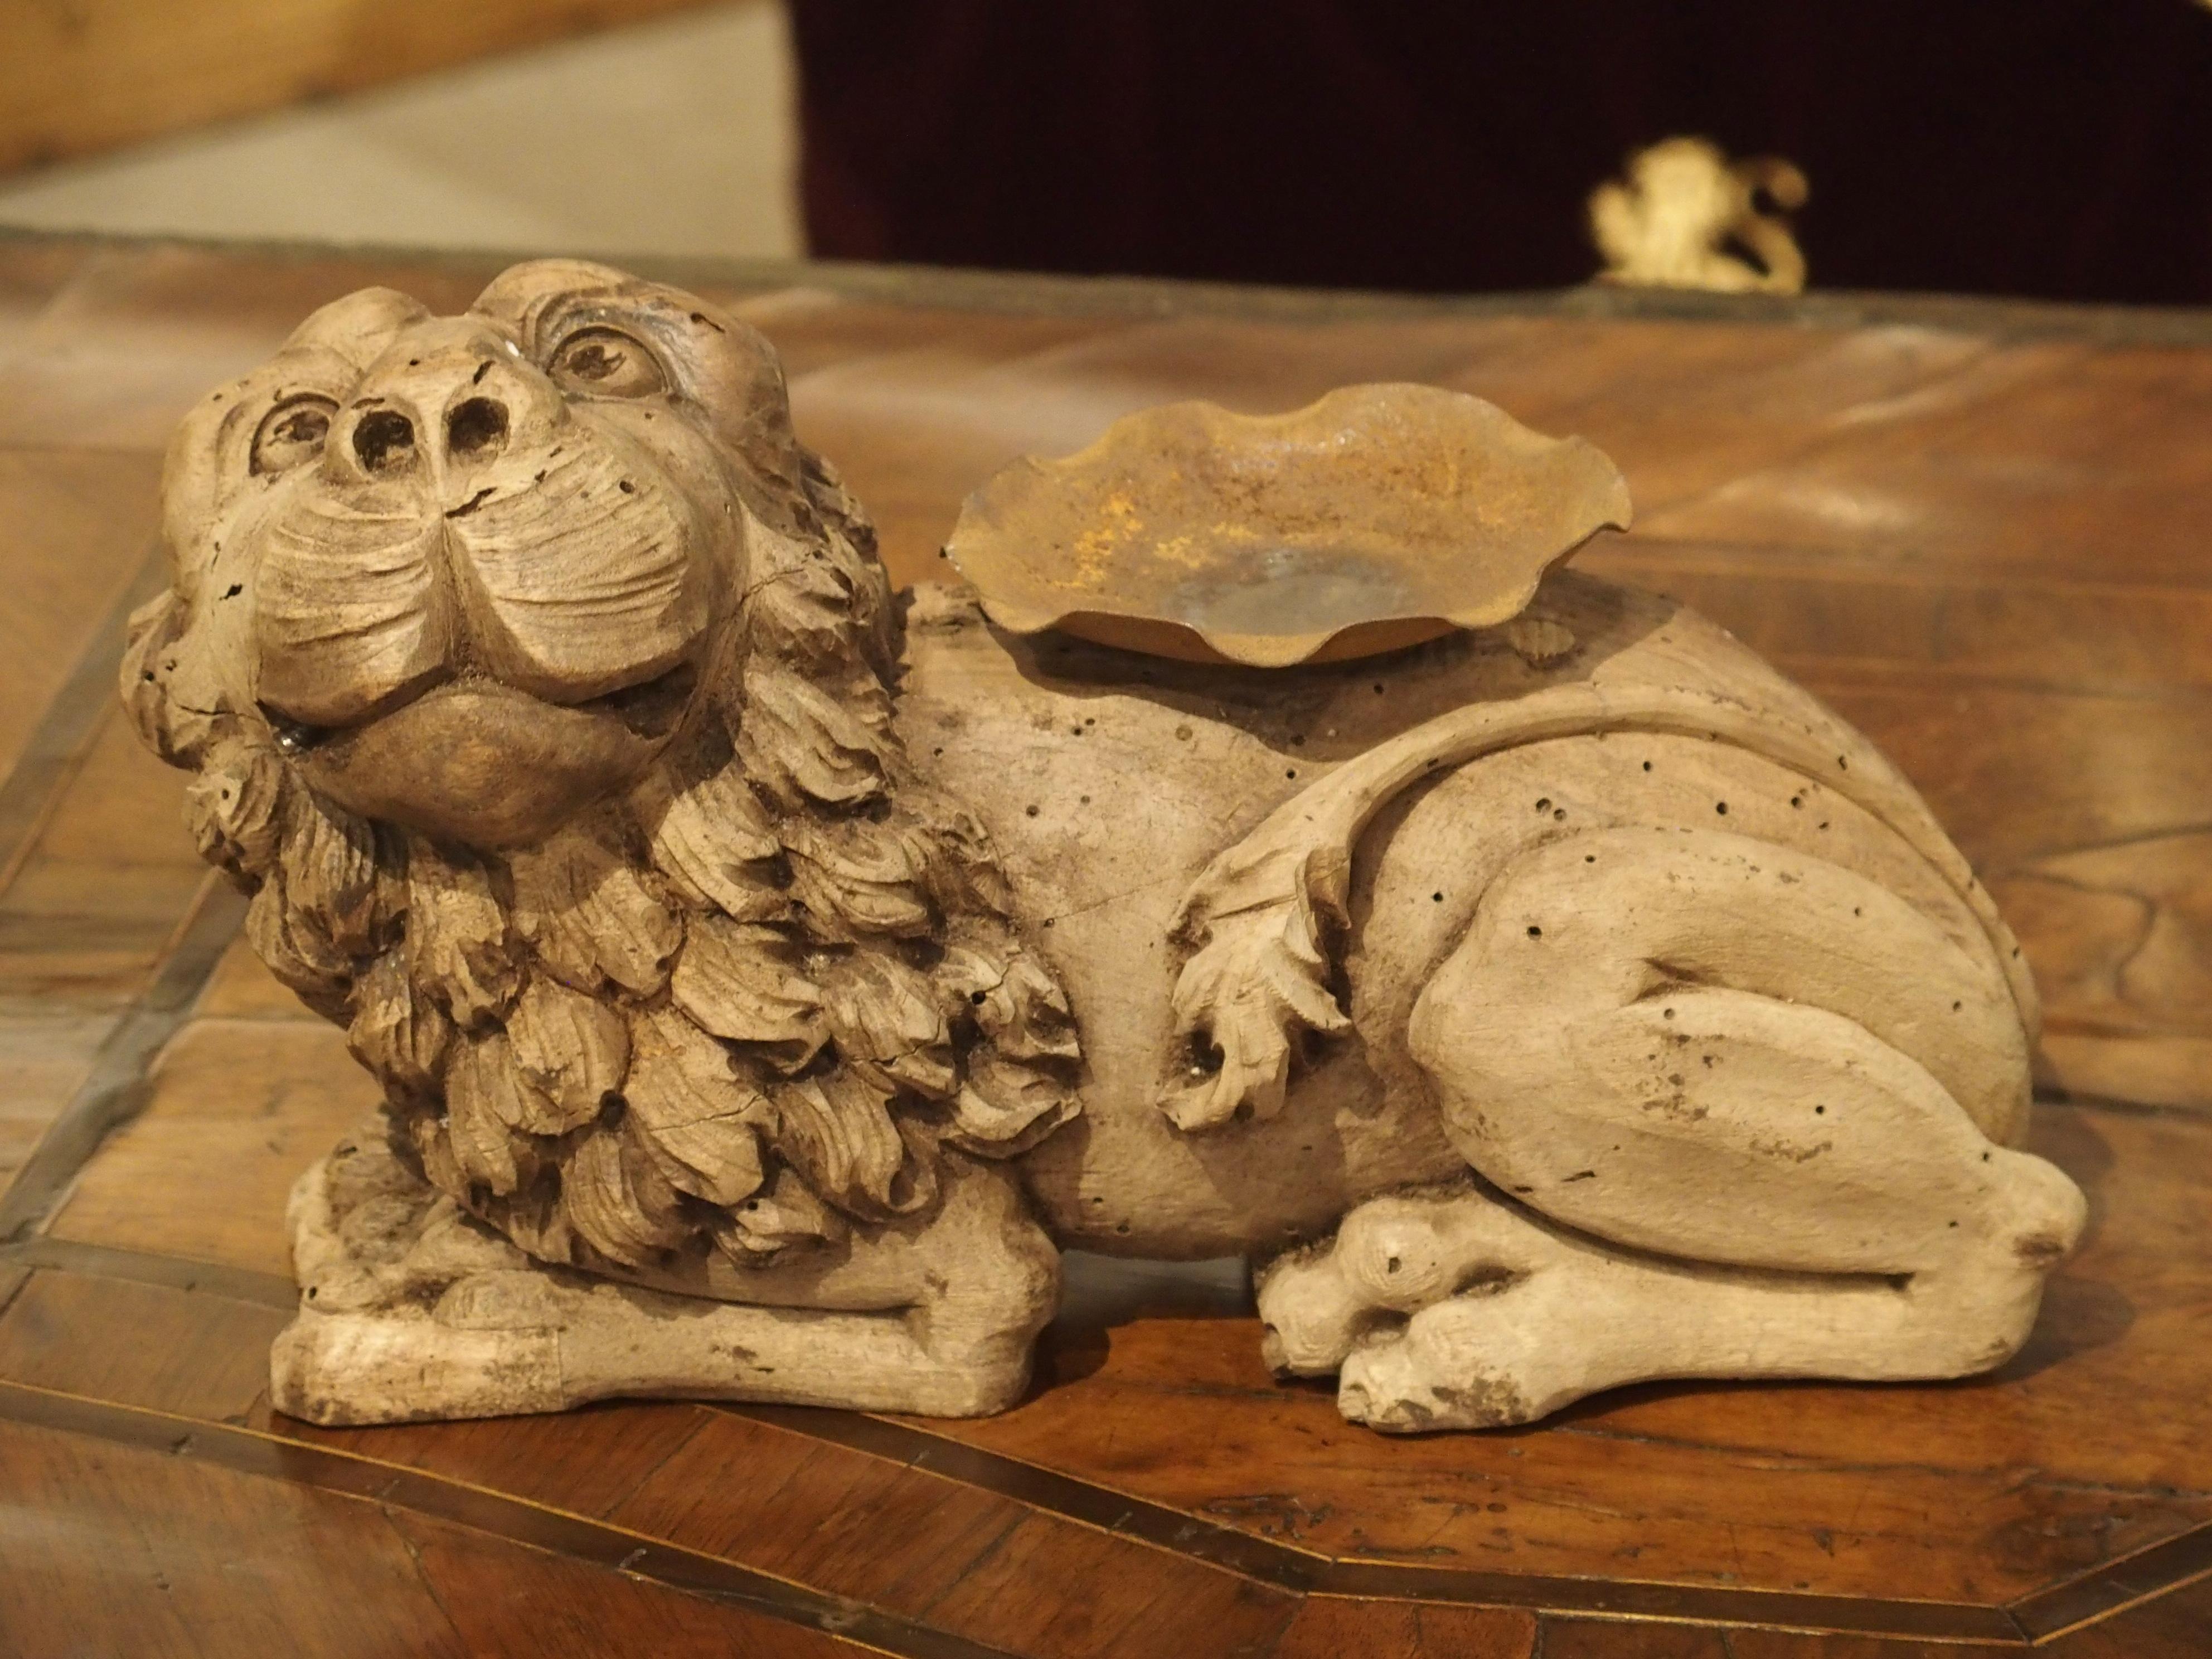 Originally part of an architectural fragment or a decorative piece of a large furniture, this carved antique lion has been repurposed into a candleholder with an iron bobeche.

The hand carved lion faces to the left and is looking up with an